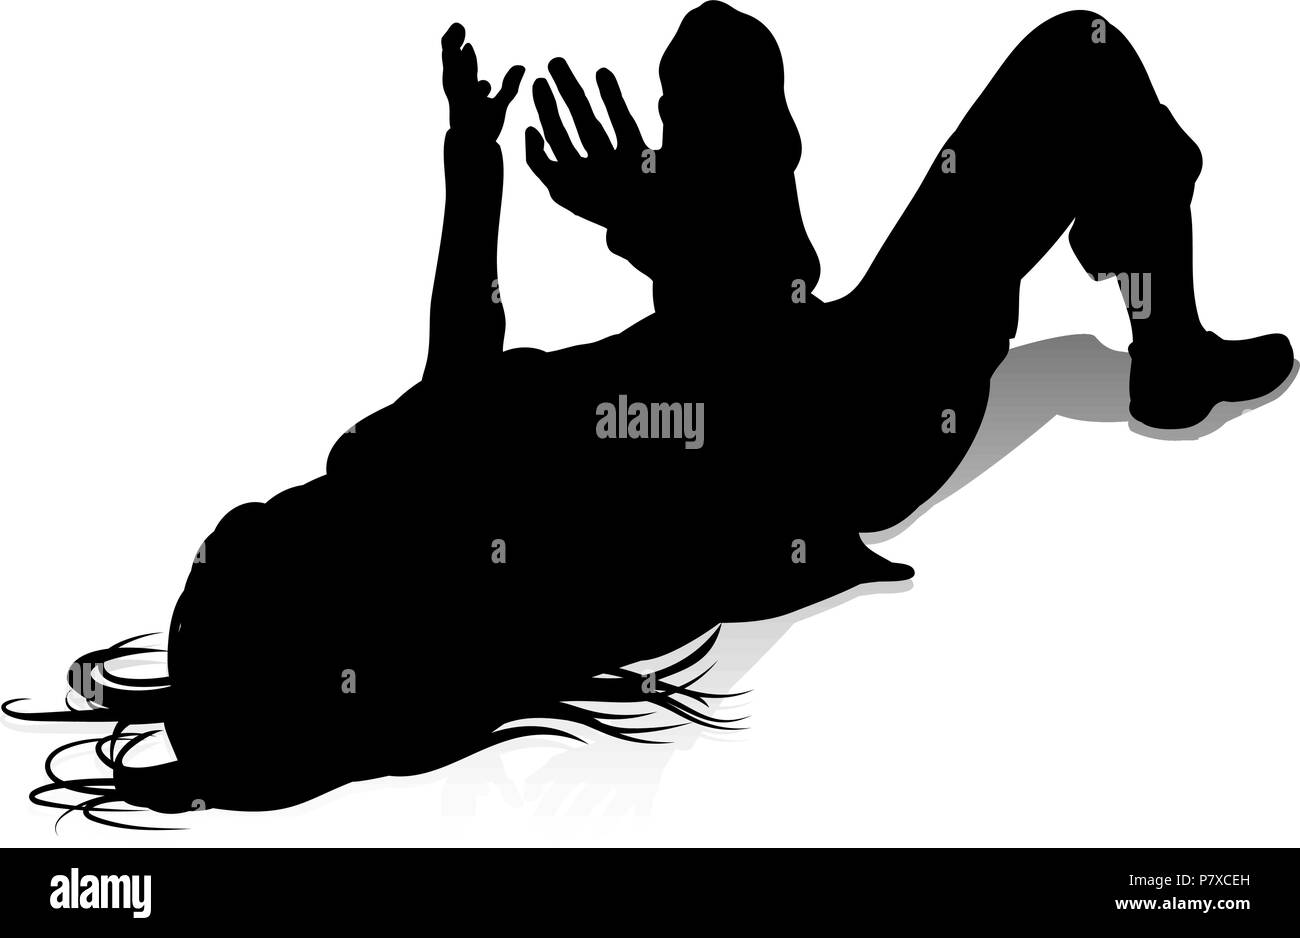 Young Person Silhouette Stock Vector